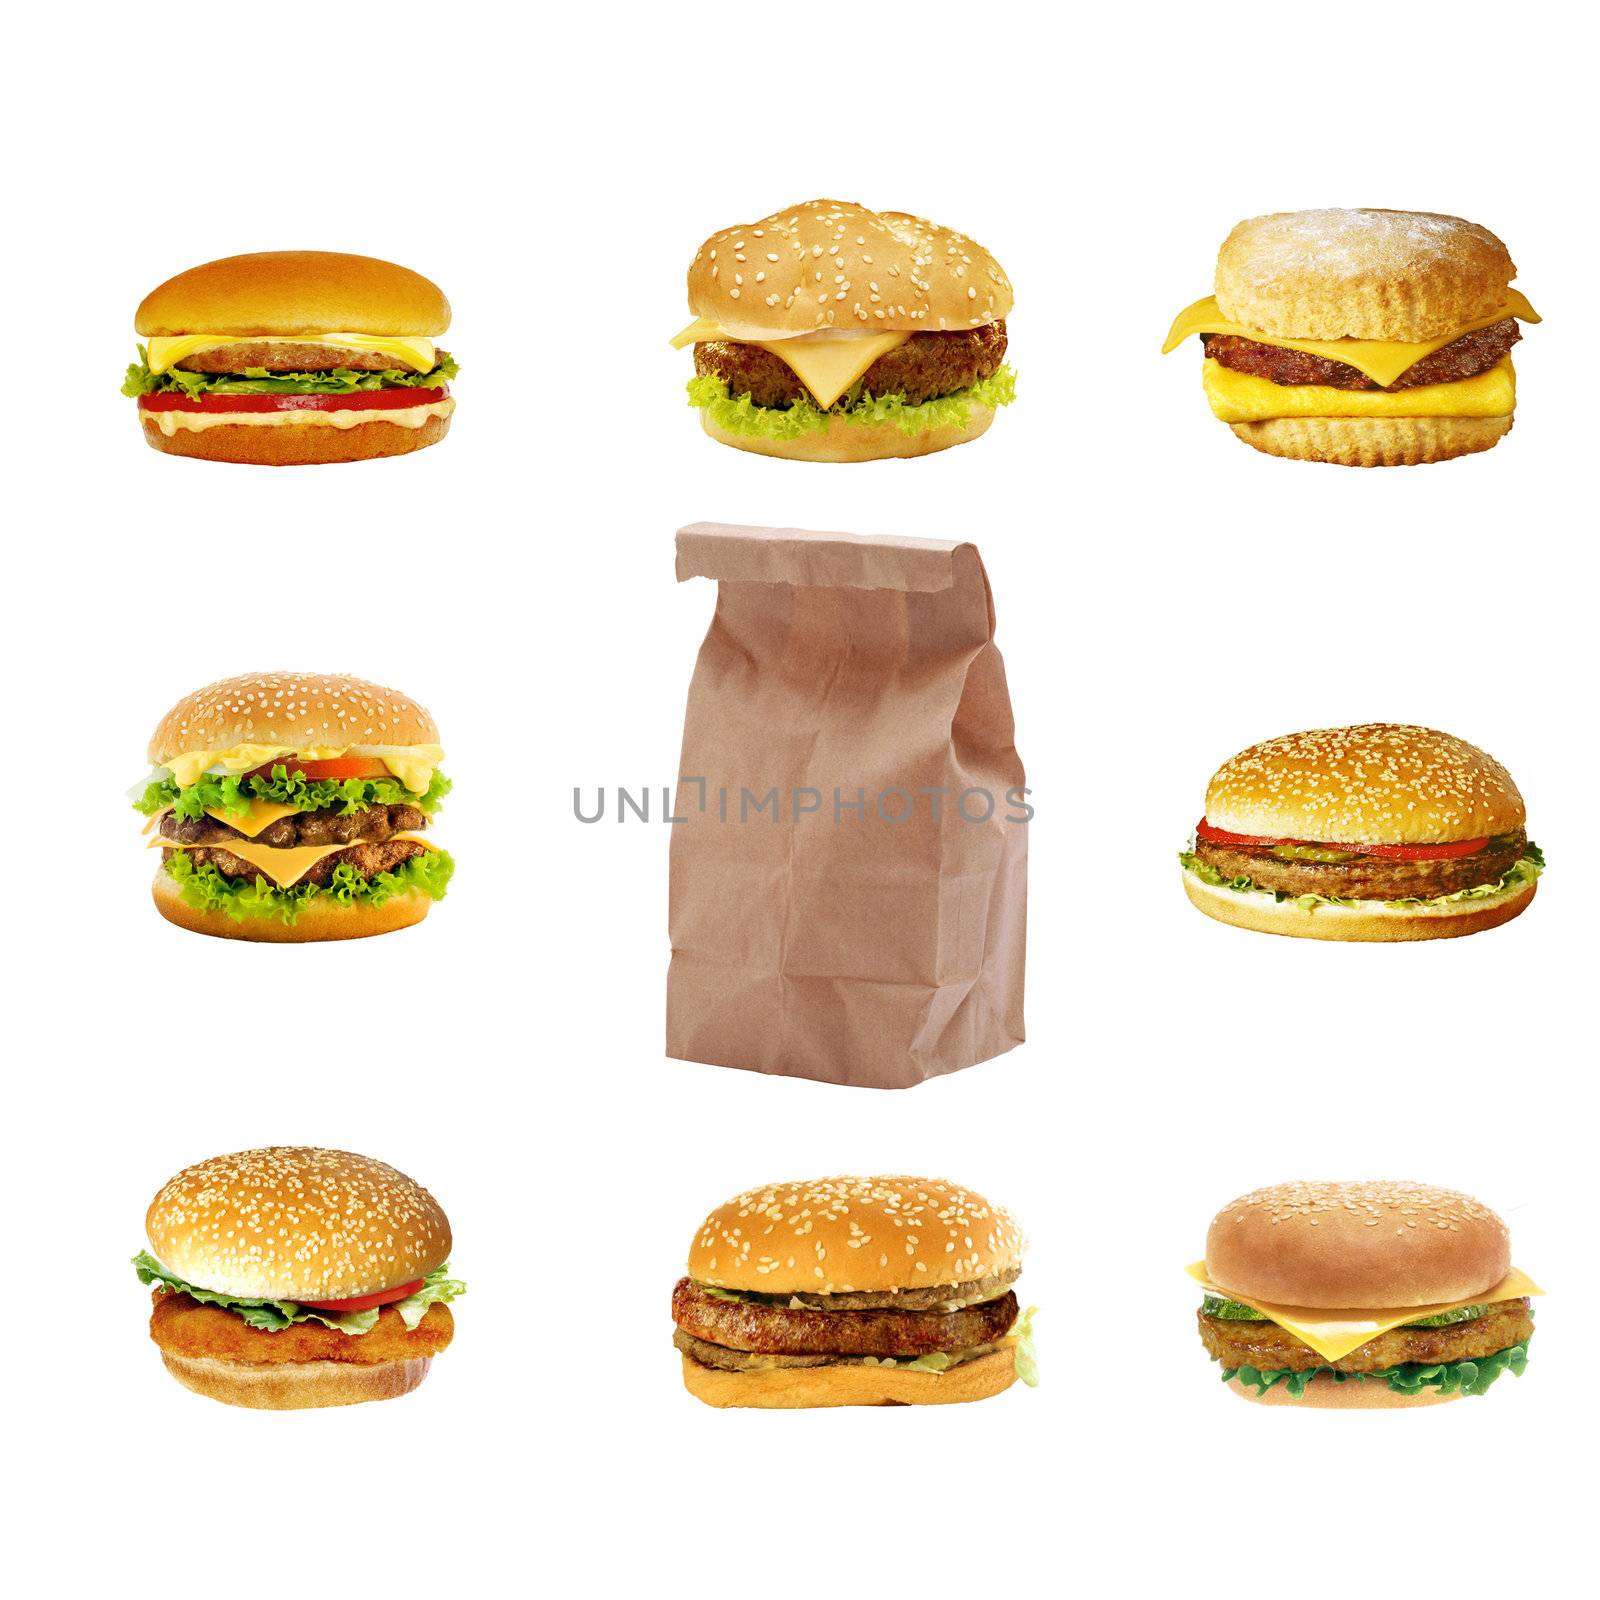 Hamburgers and cheeseburgers with package